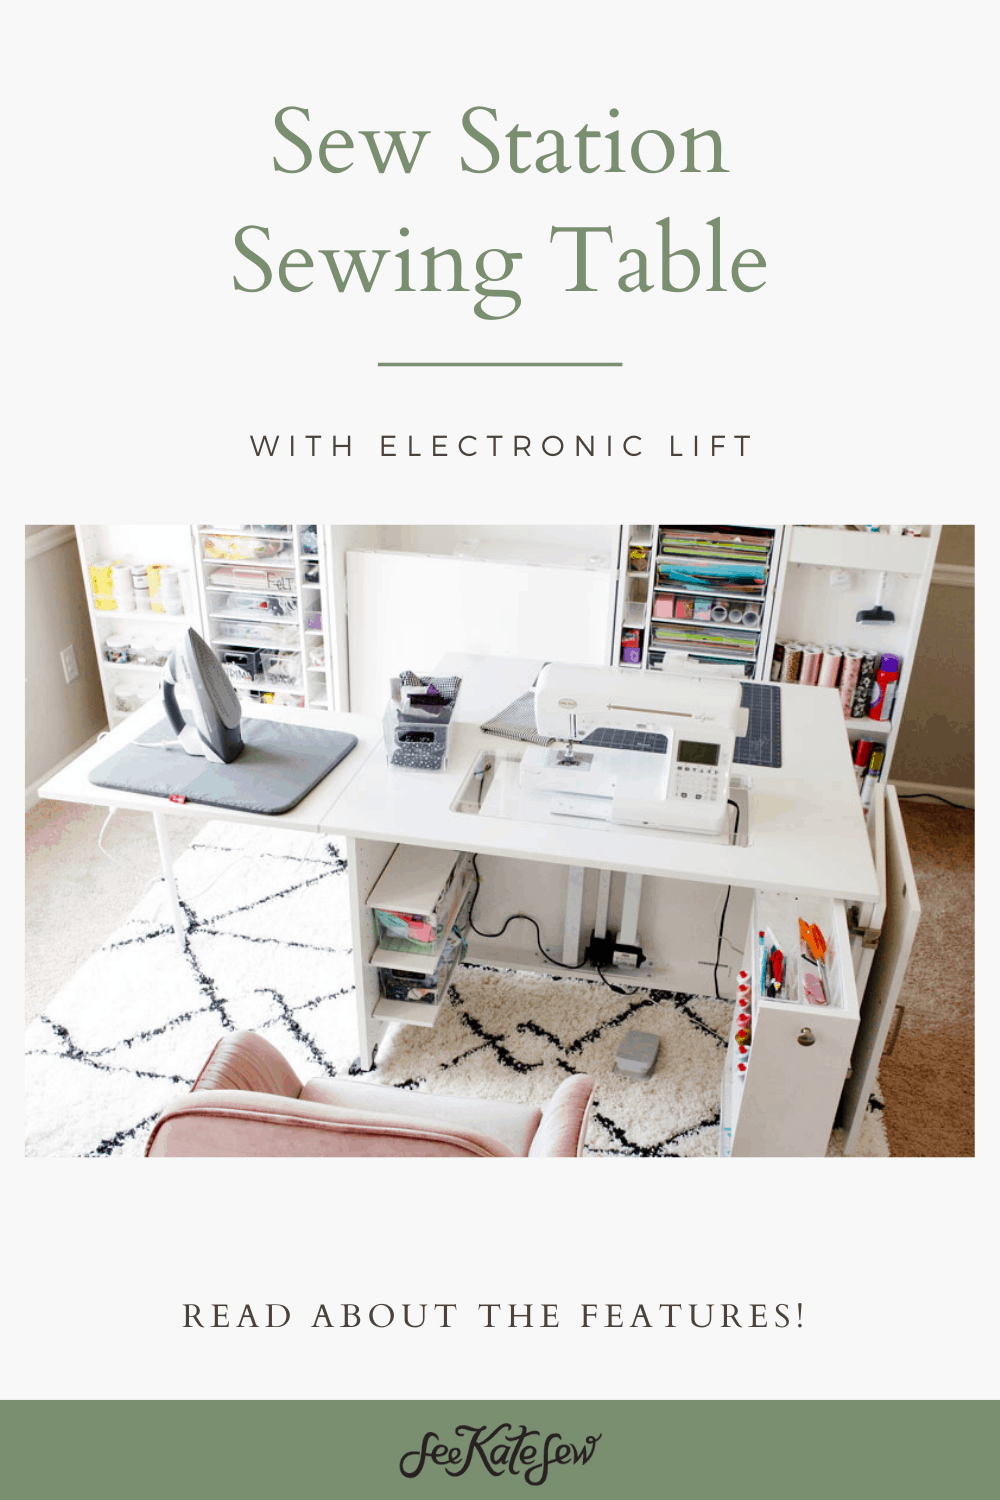 Sew Station Review for a Sewing Room • Heather Handmade